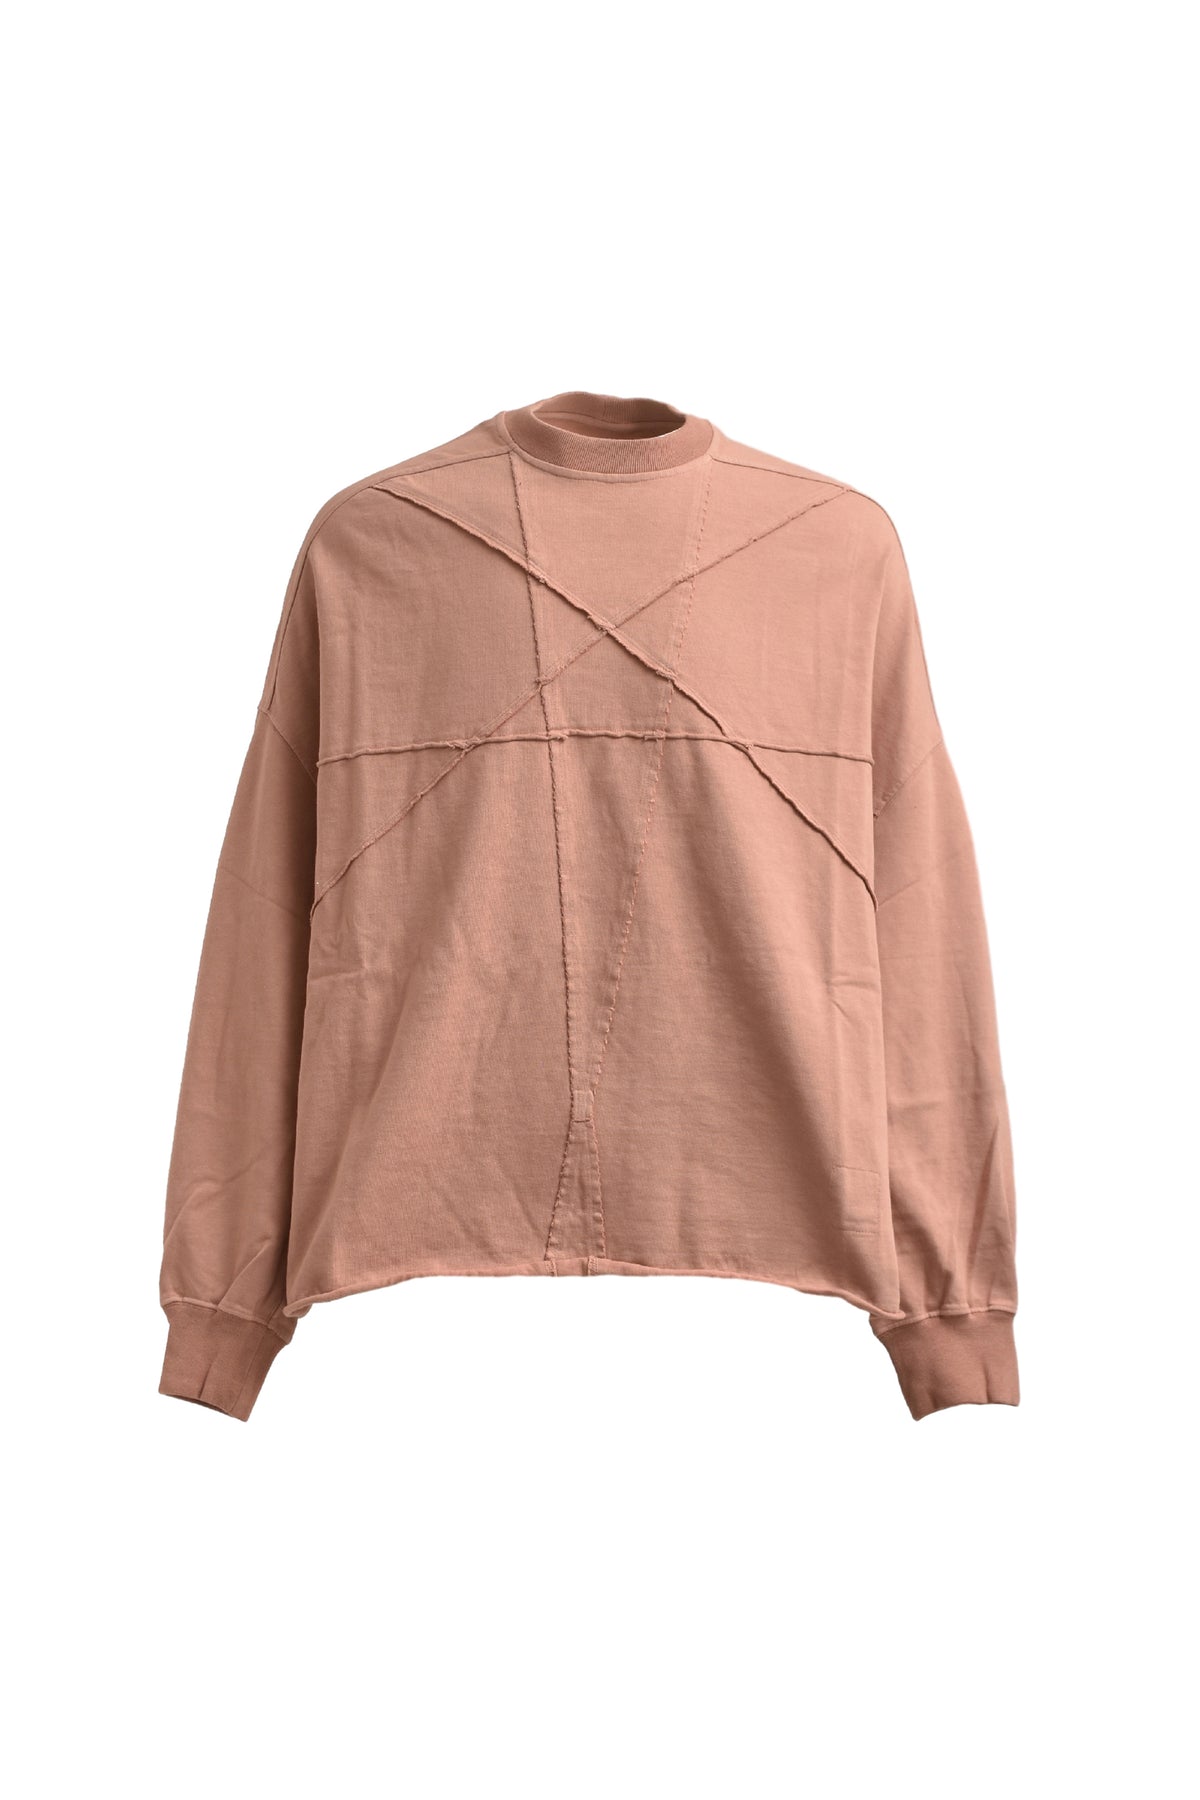 CRATER T / PINK